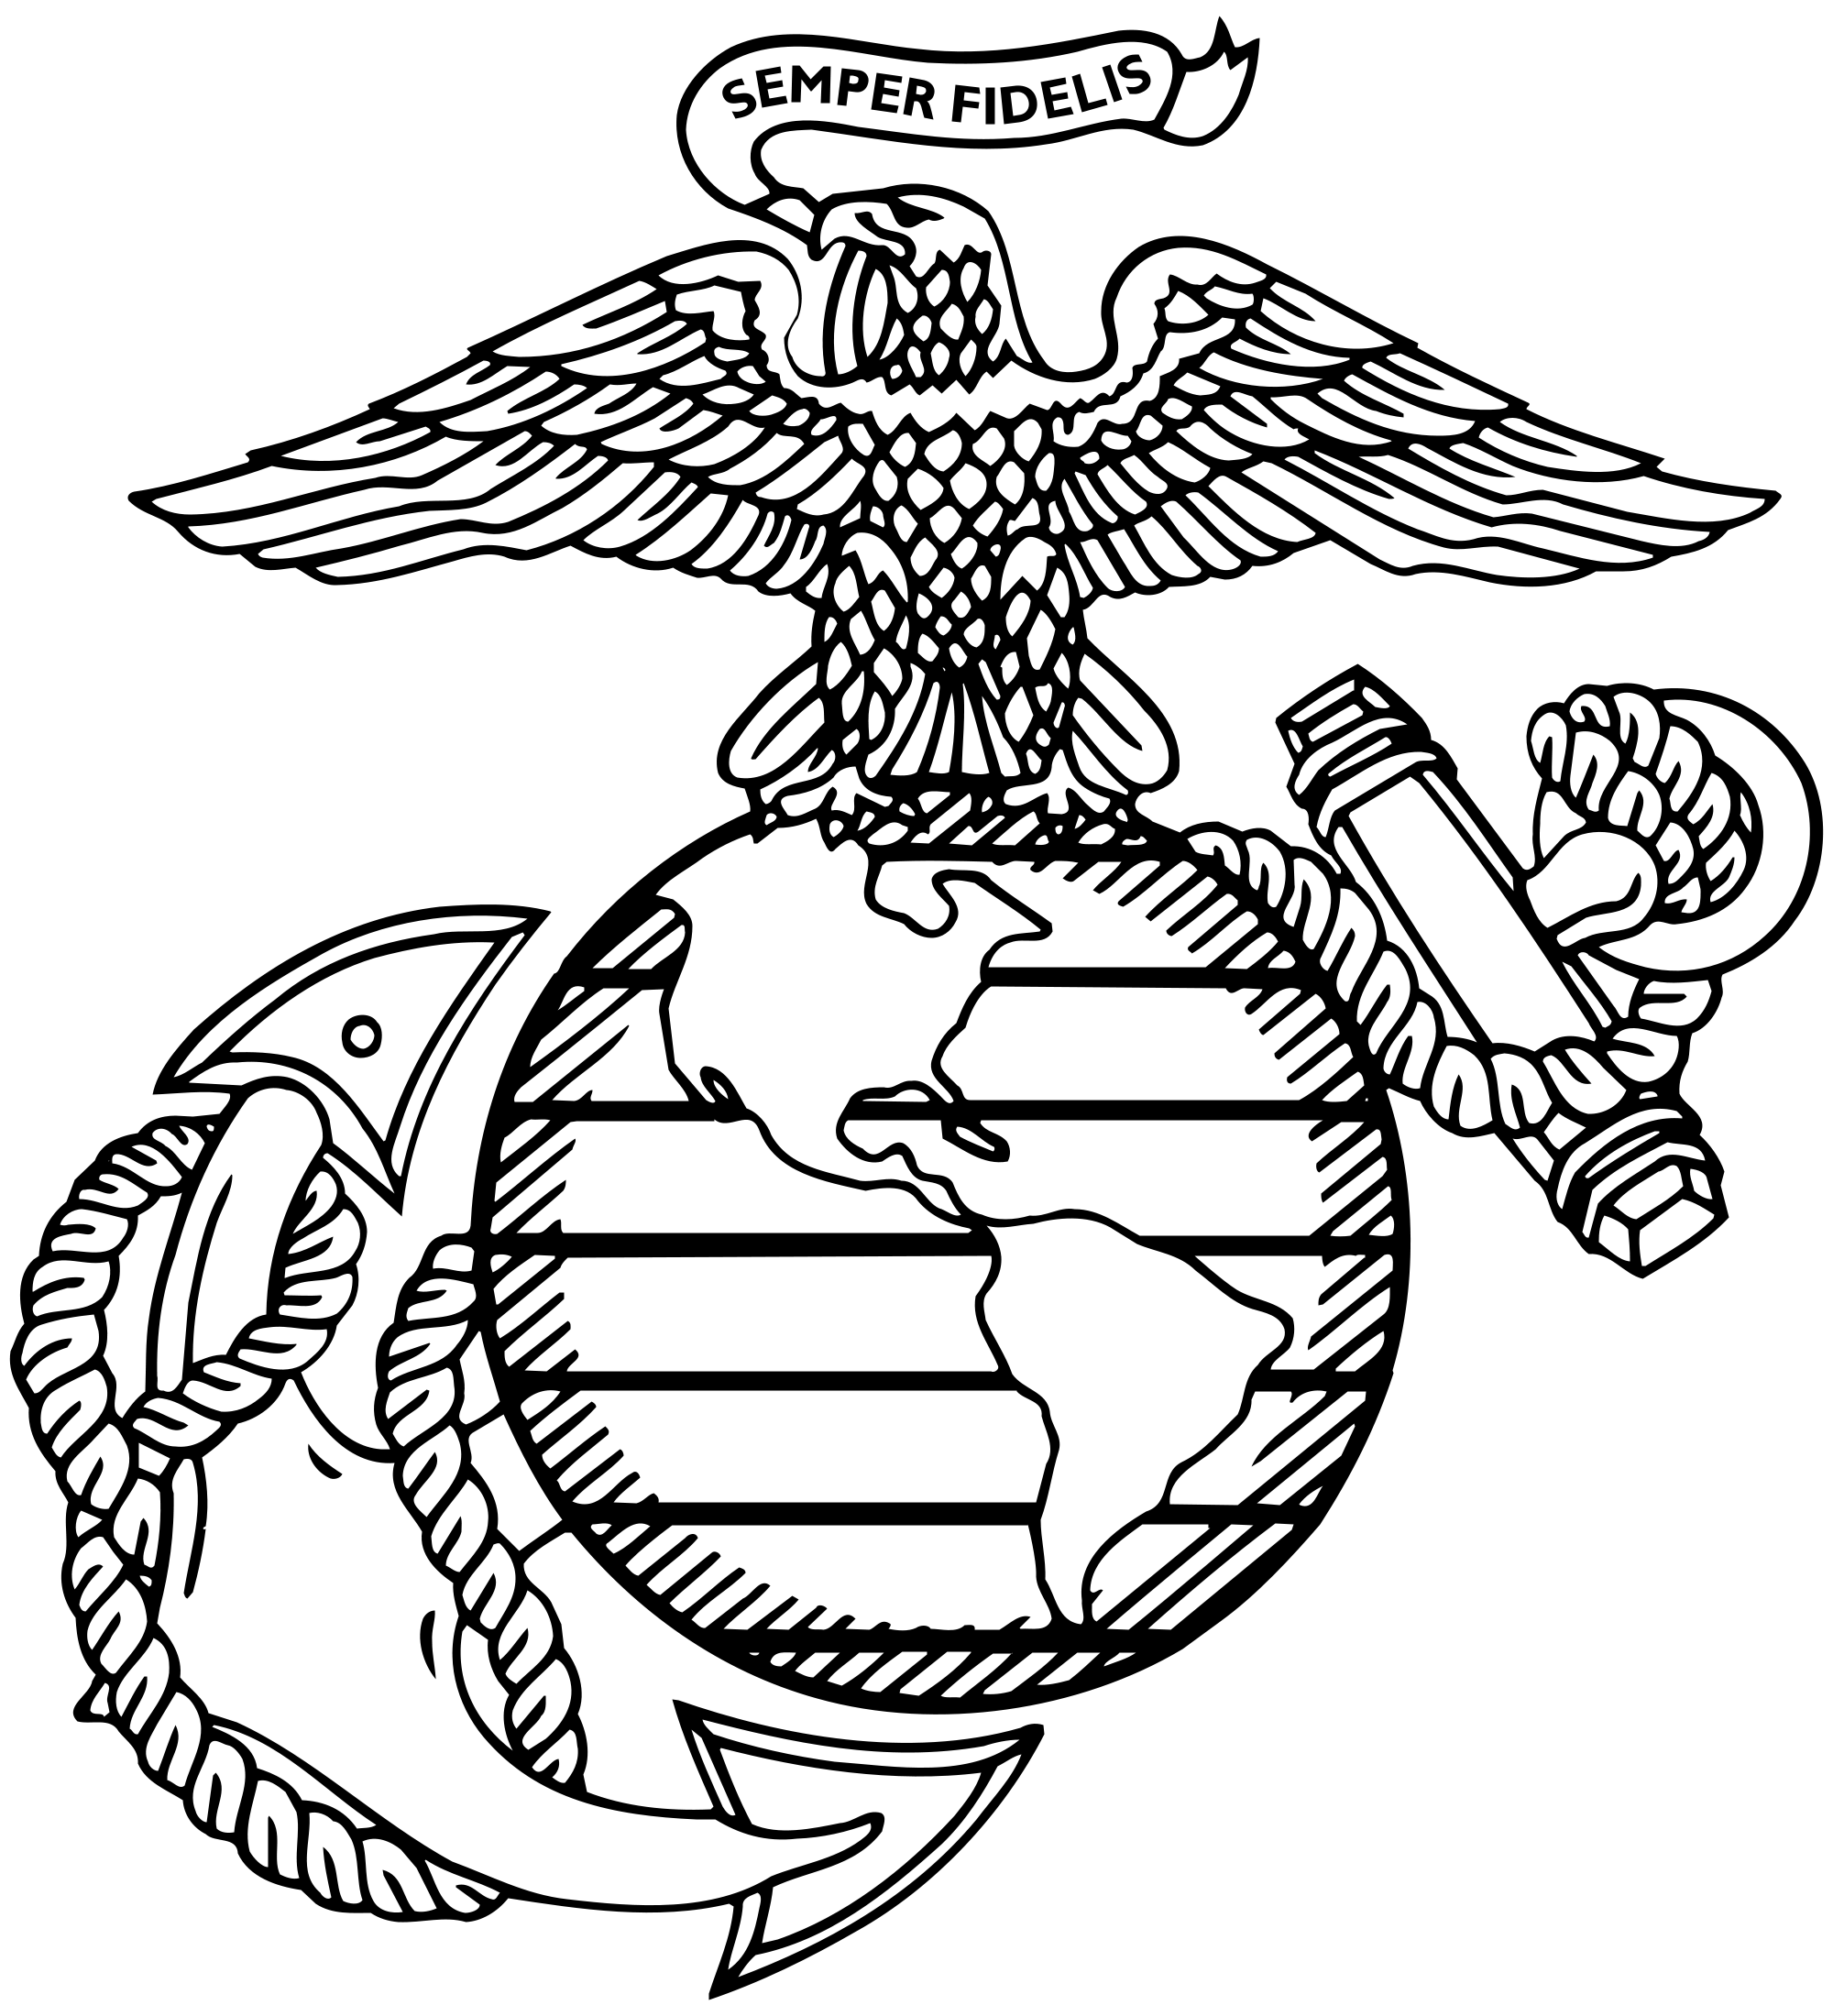 Eagle globe and anchor. Sailor clipart marine soldier